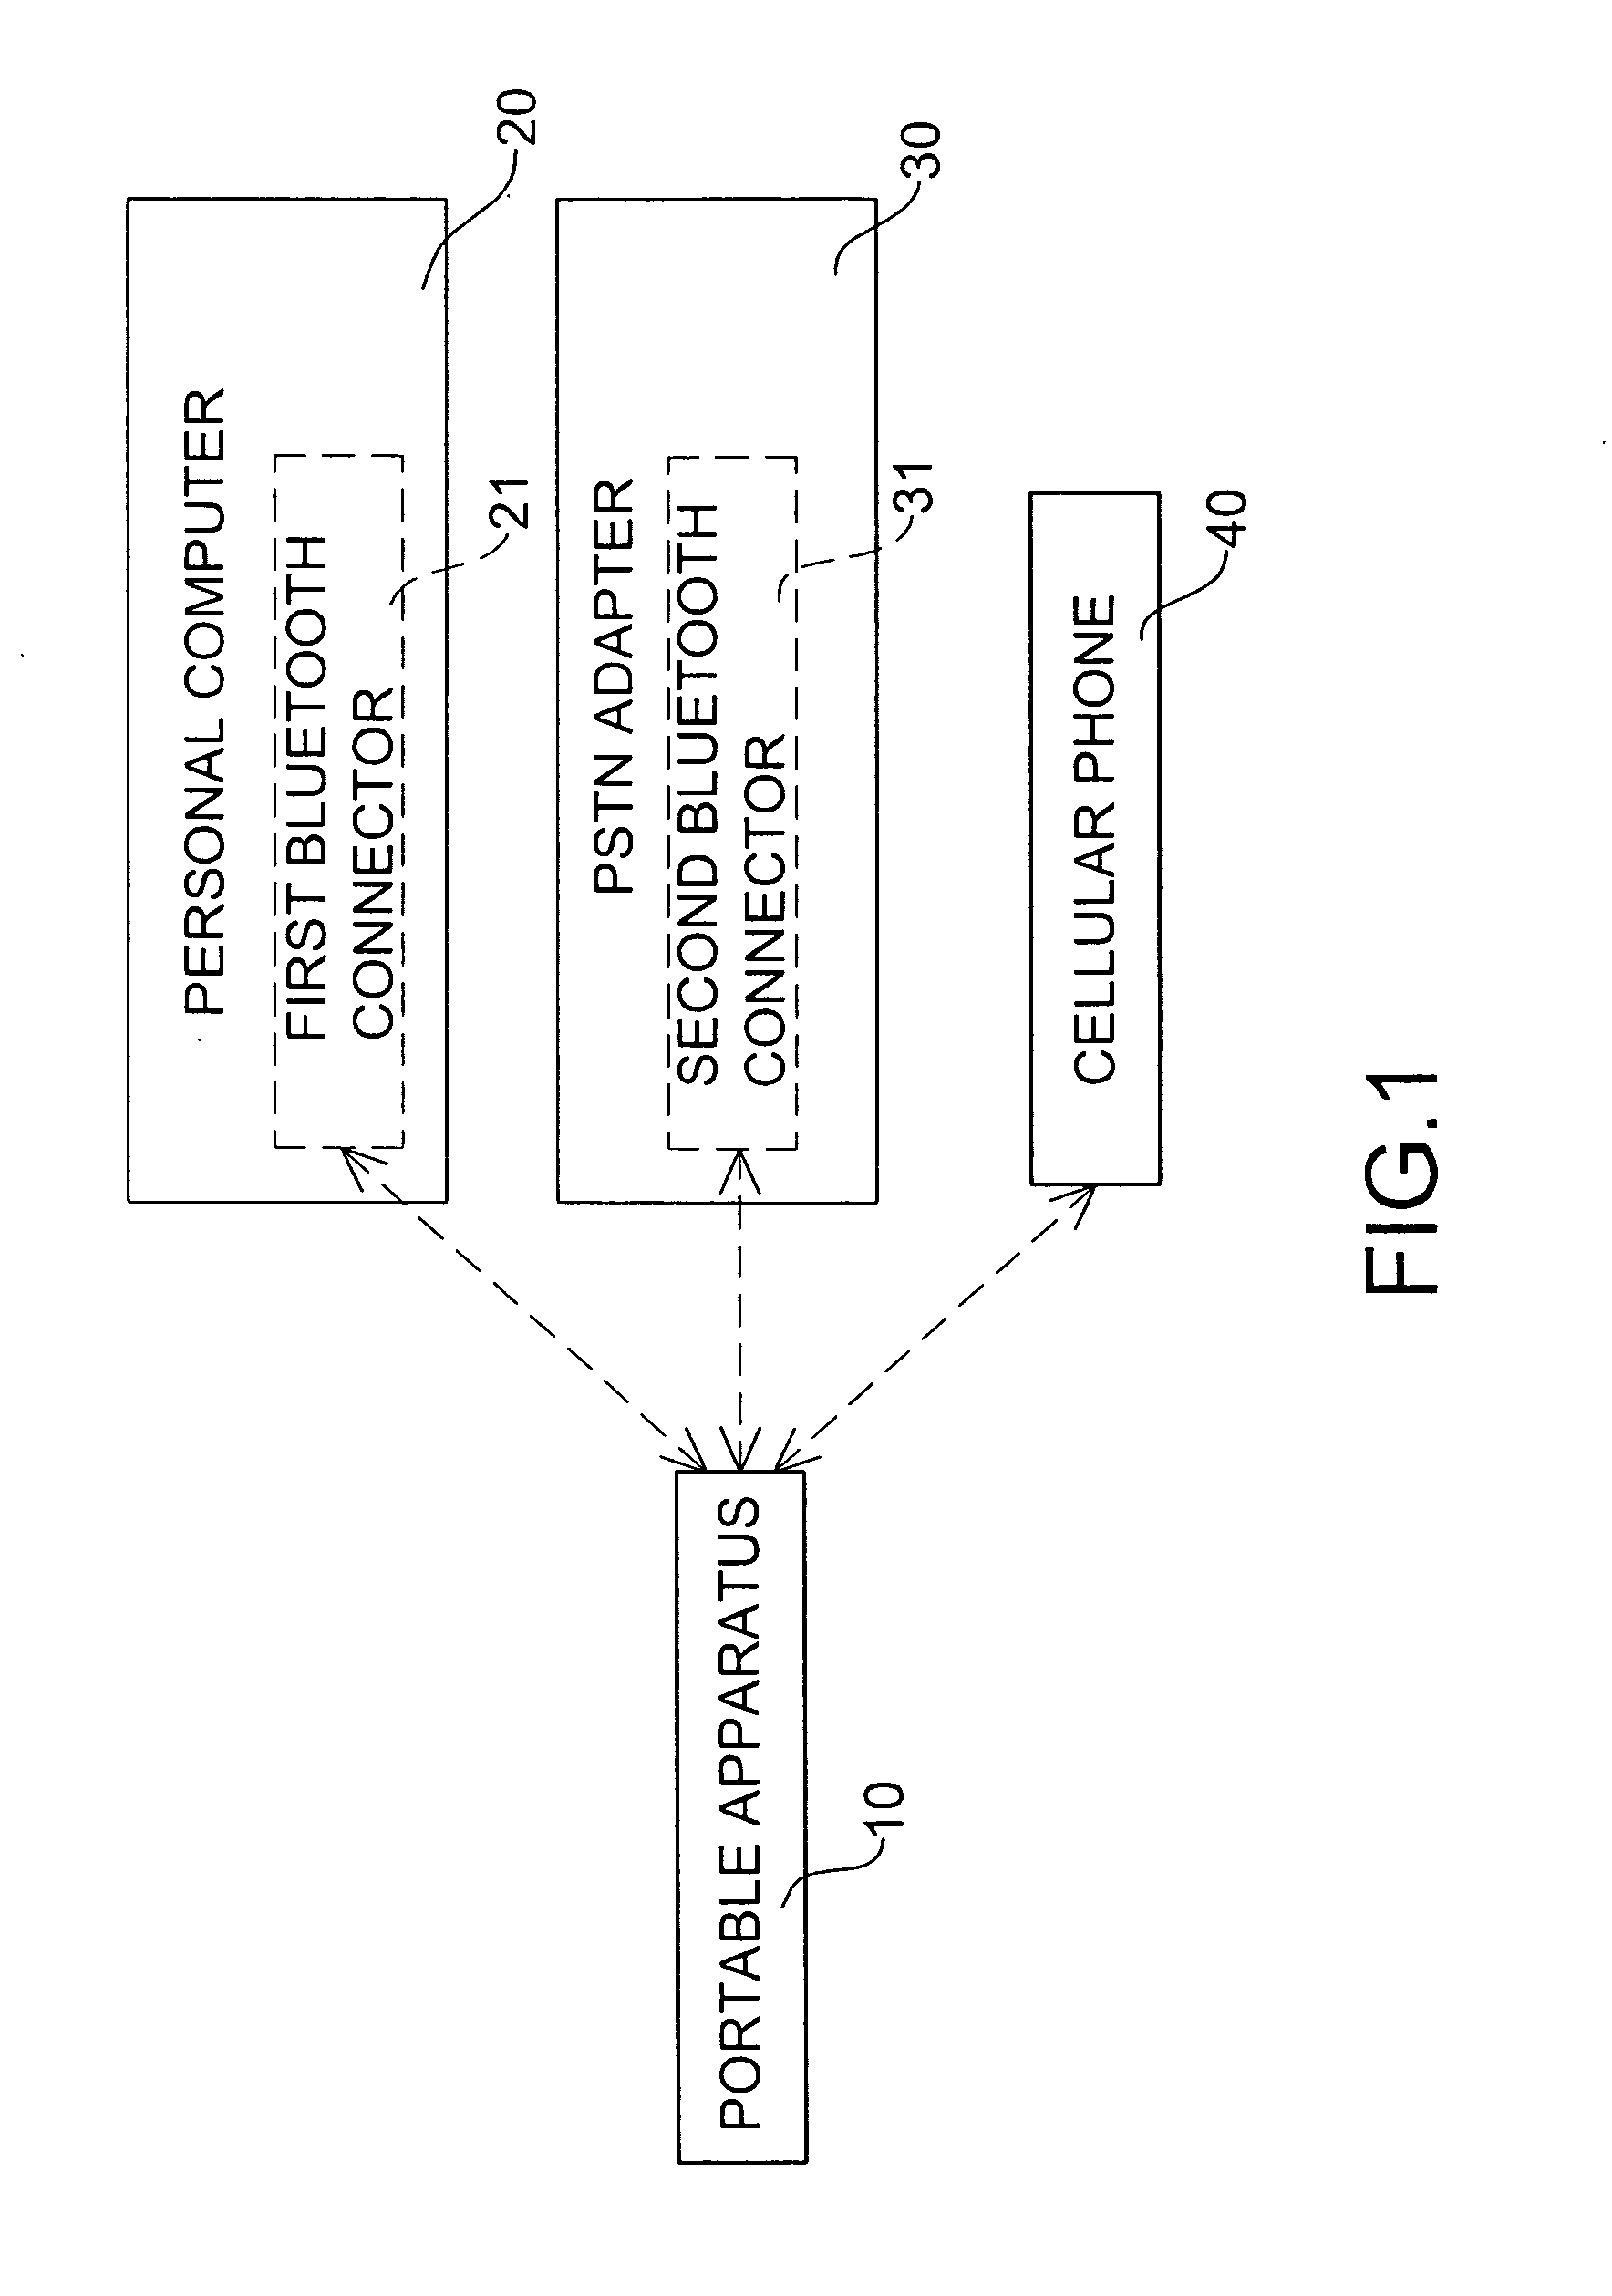 Communications integration apparatus to integrate different network structures